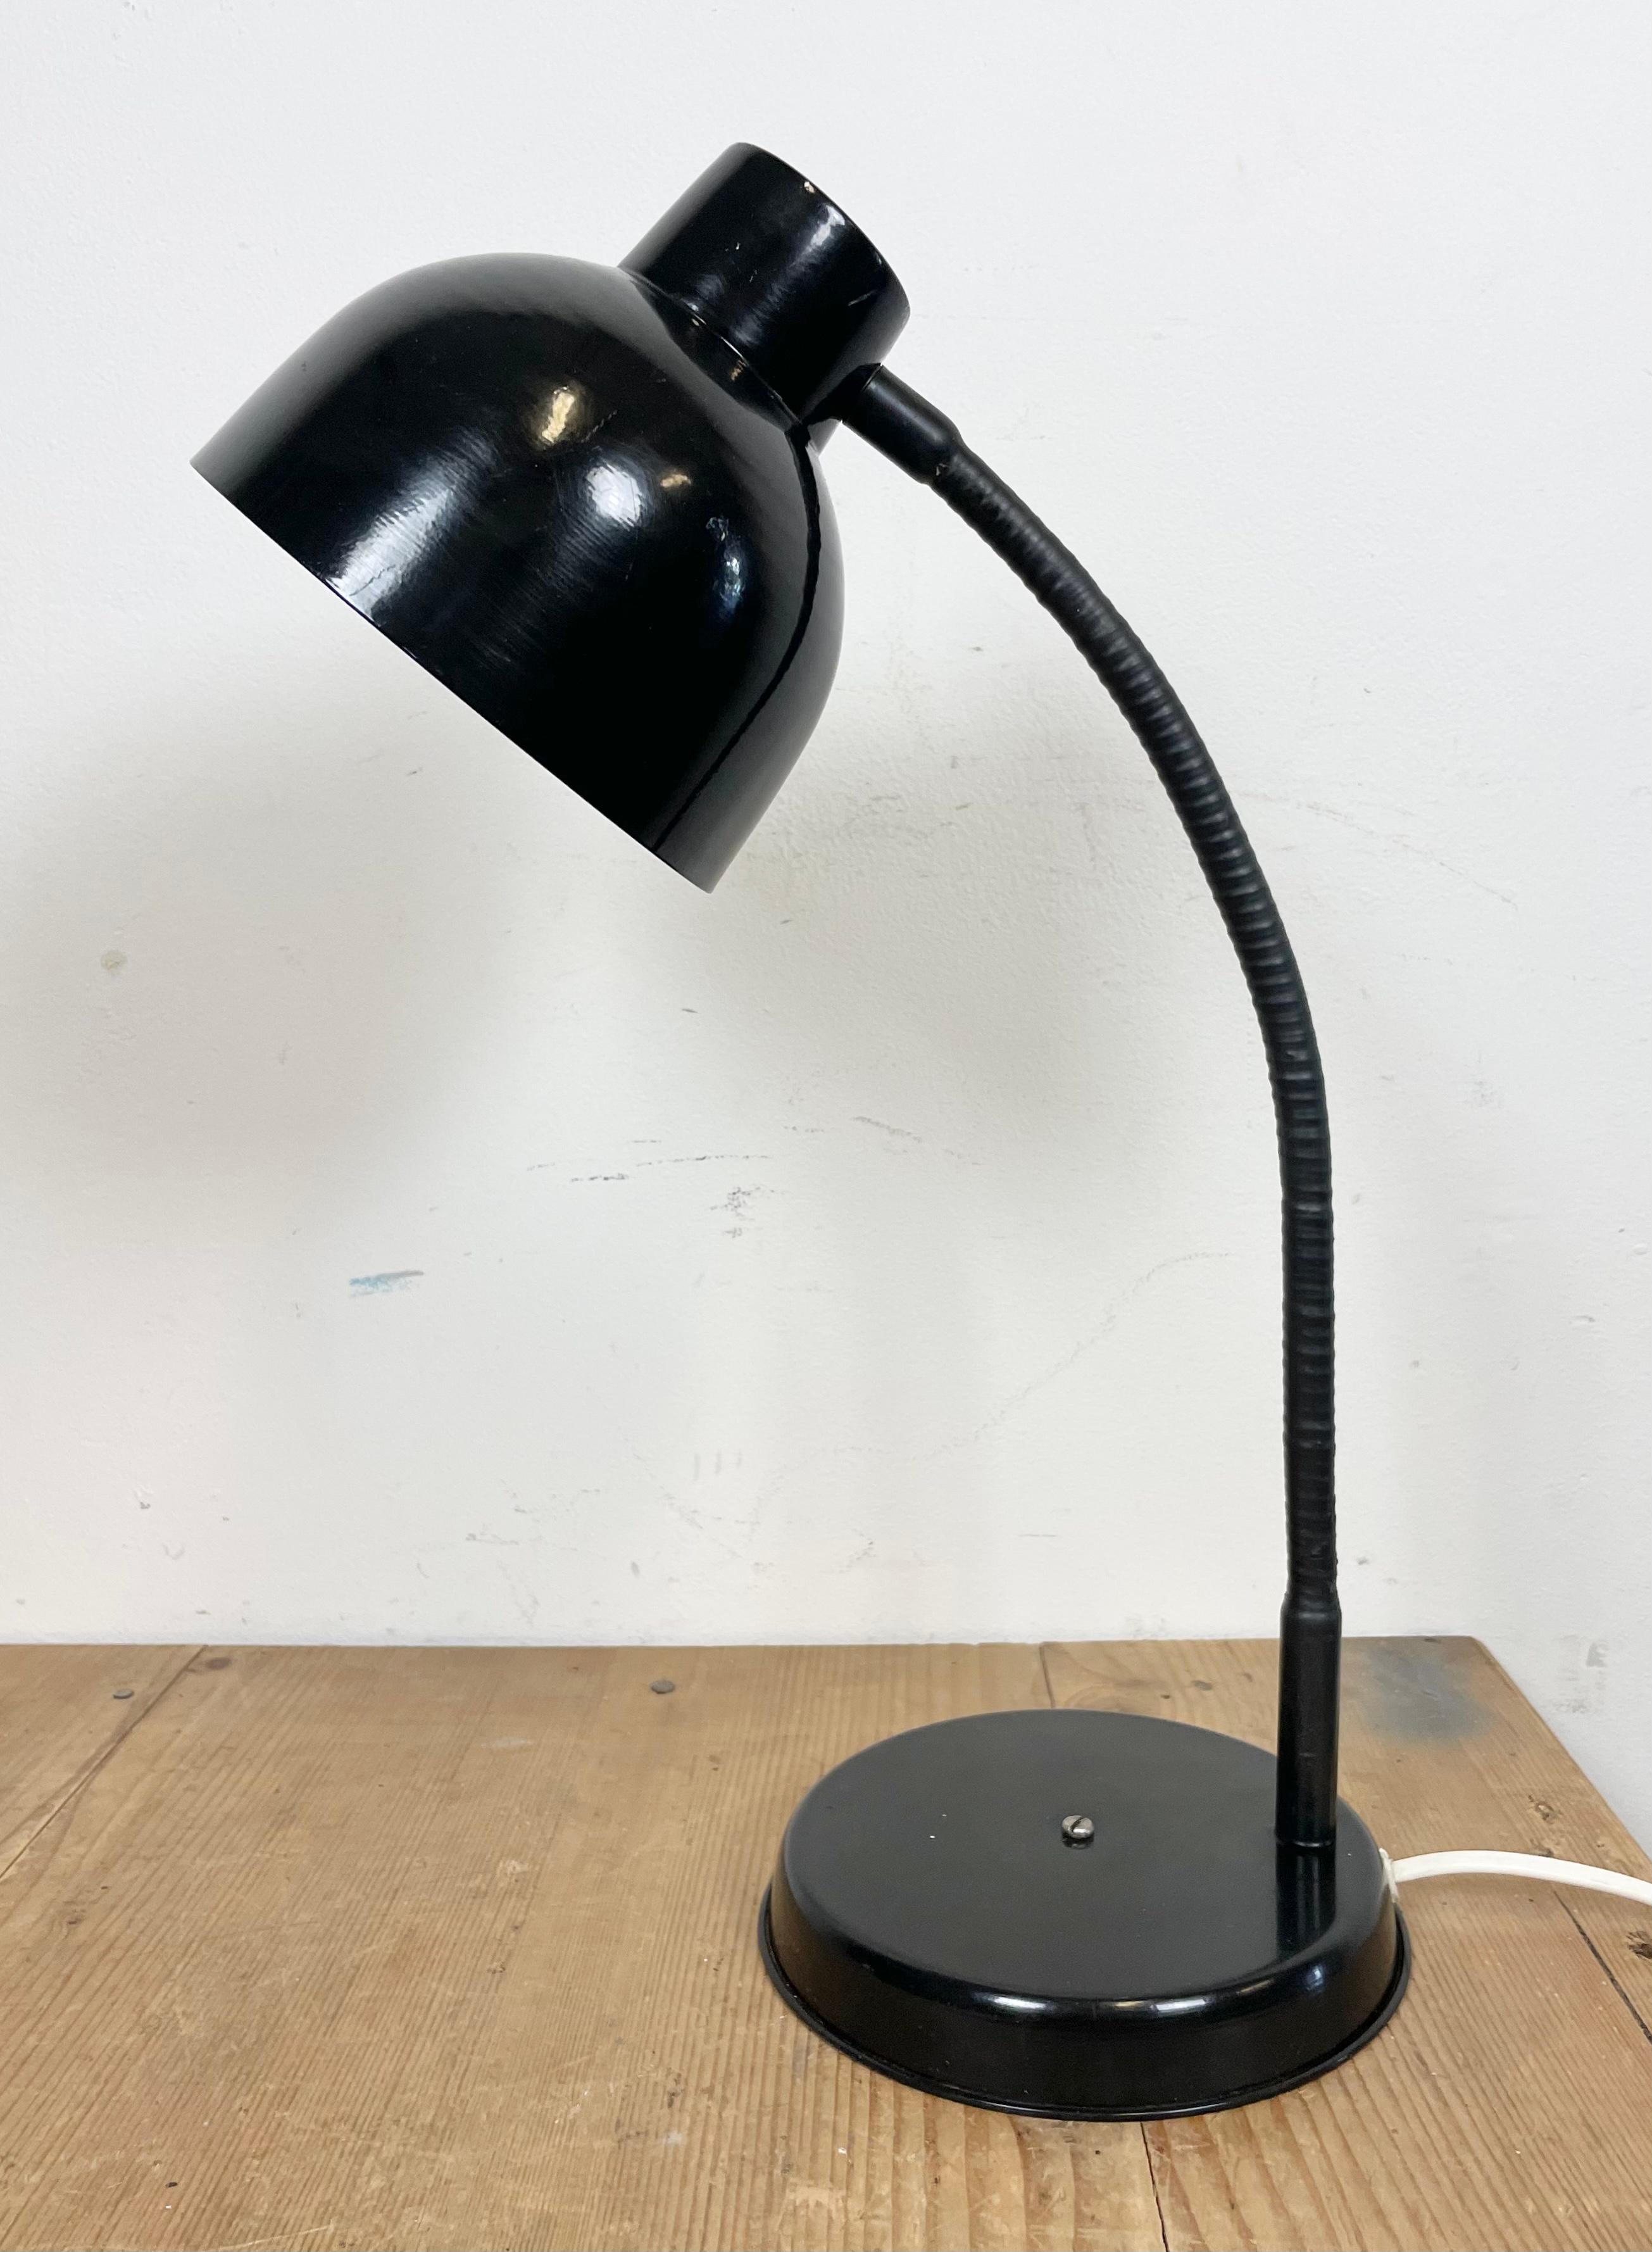 Industrial workshop table lamp made in Poland during the 1960s.It features a black metal base and shade and a black ruberized gooseneck. The original socket requires E27/E26 lightbulbs.
The diameter of the shade is 15 cm. Fully functional.